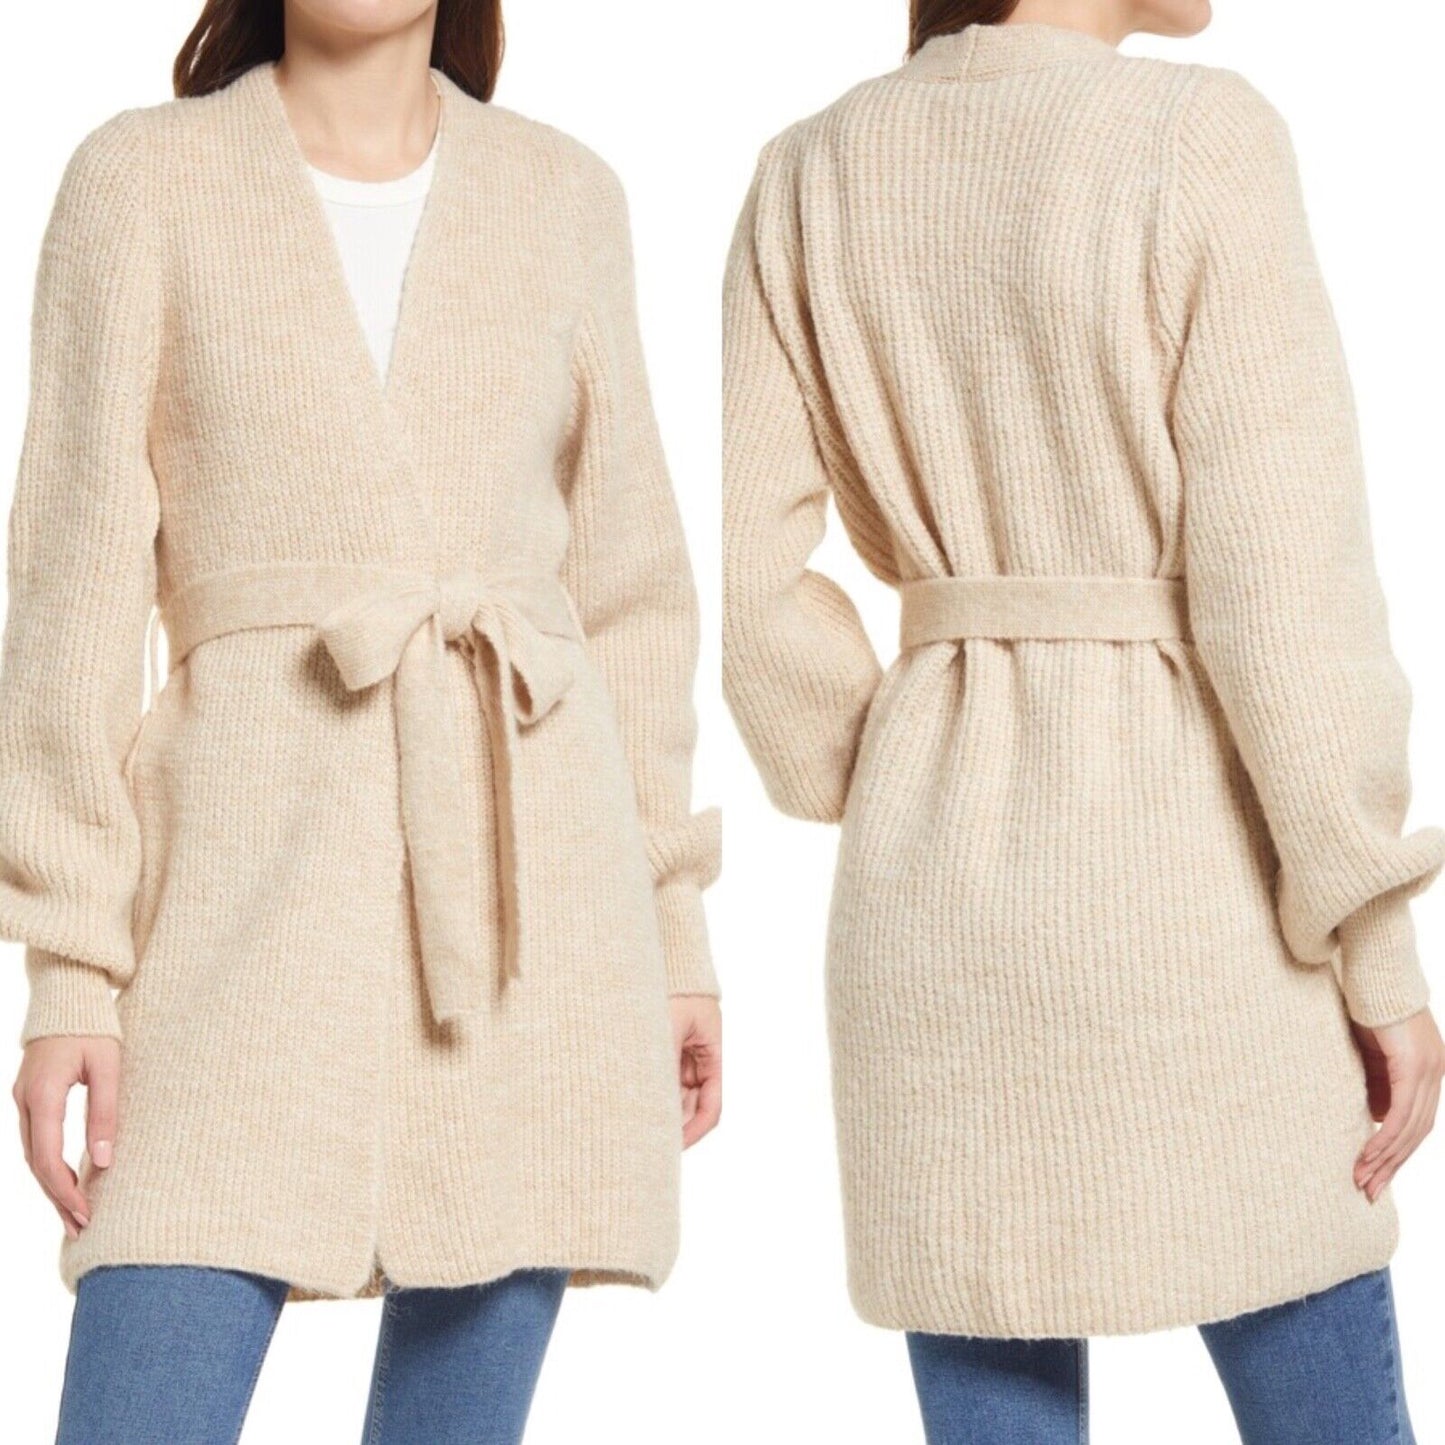 TOPSHOP Cardigan SWEATER KNIT Stone Belted BLOUSON SLEEVE Chunky Size S (4 - 6)